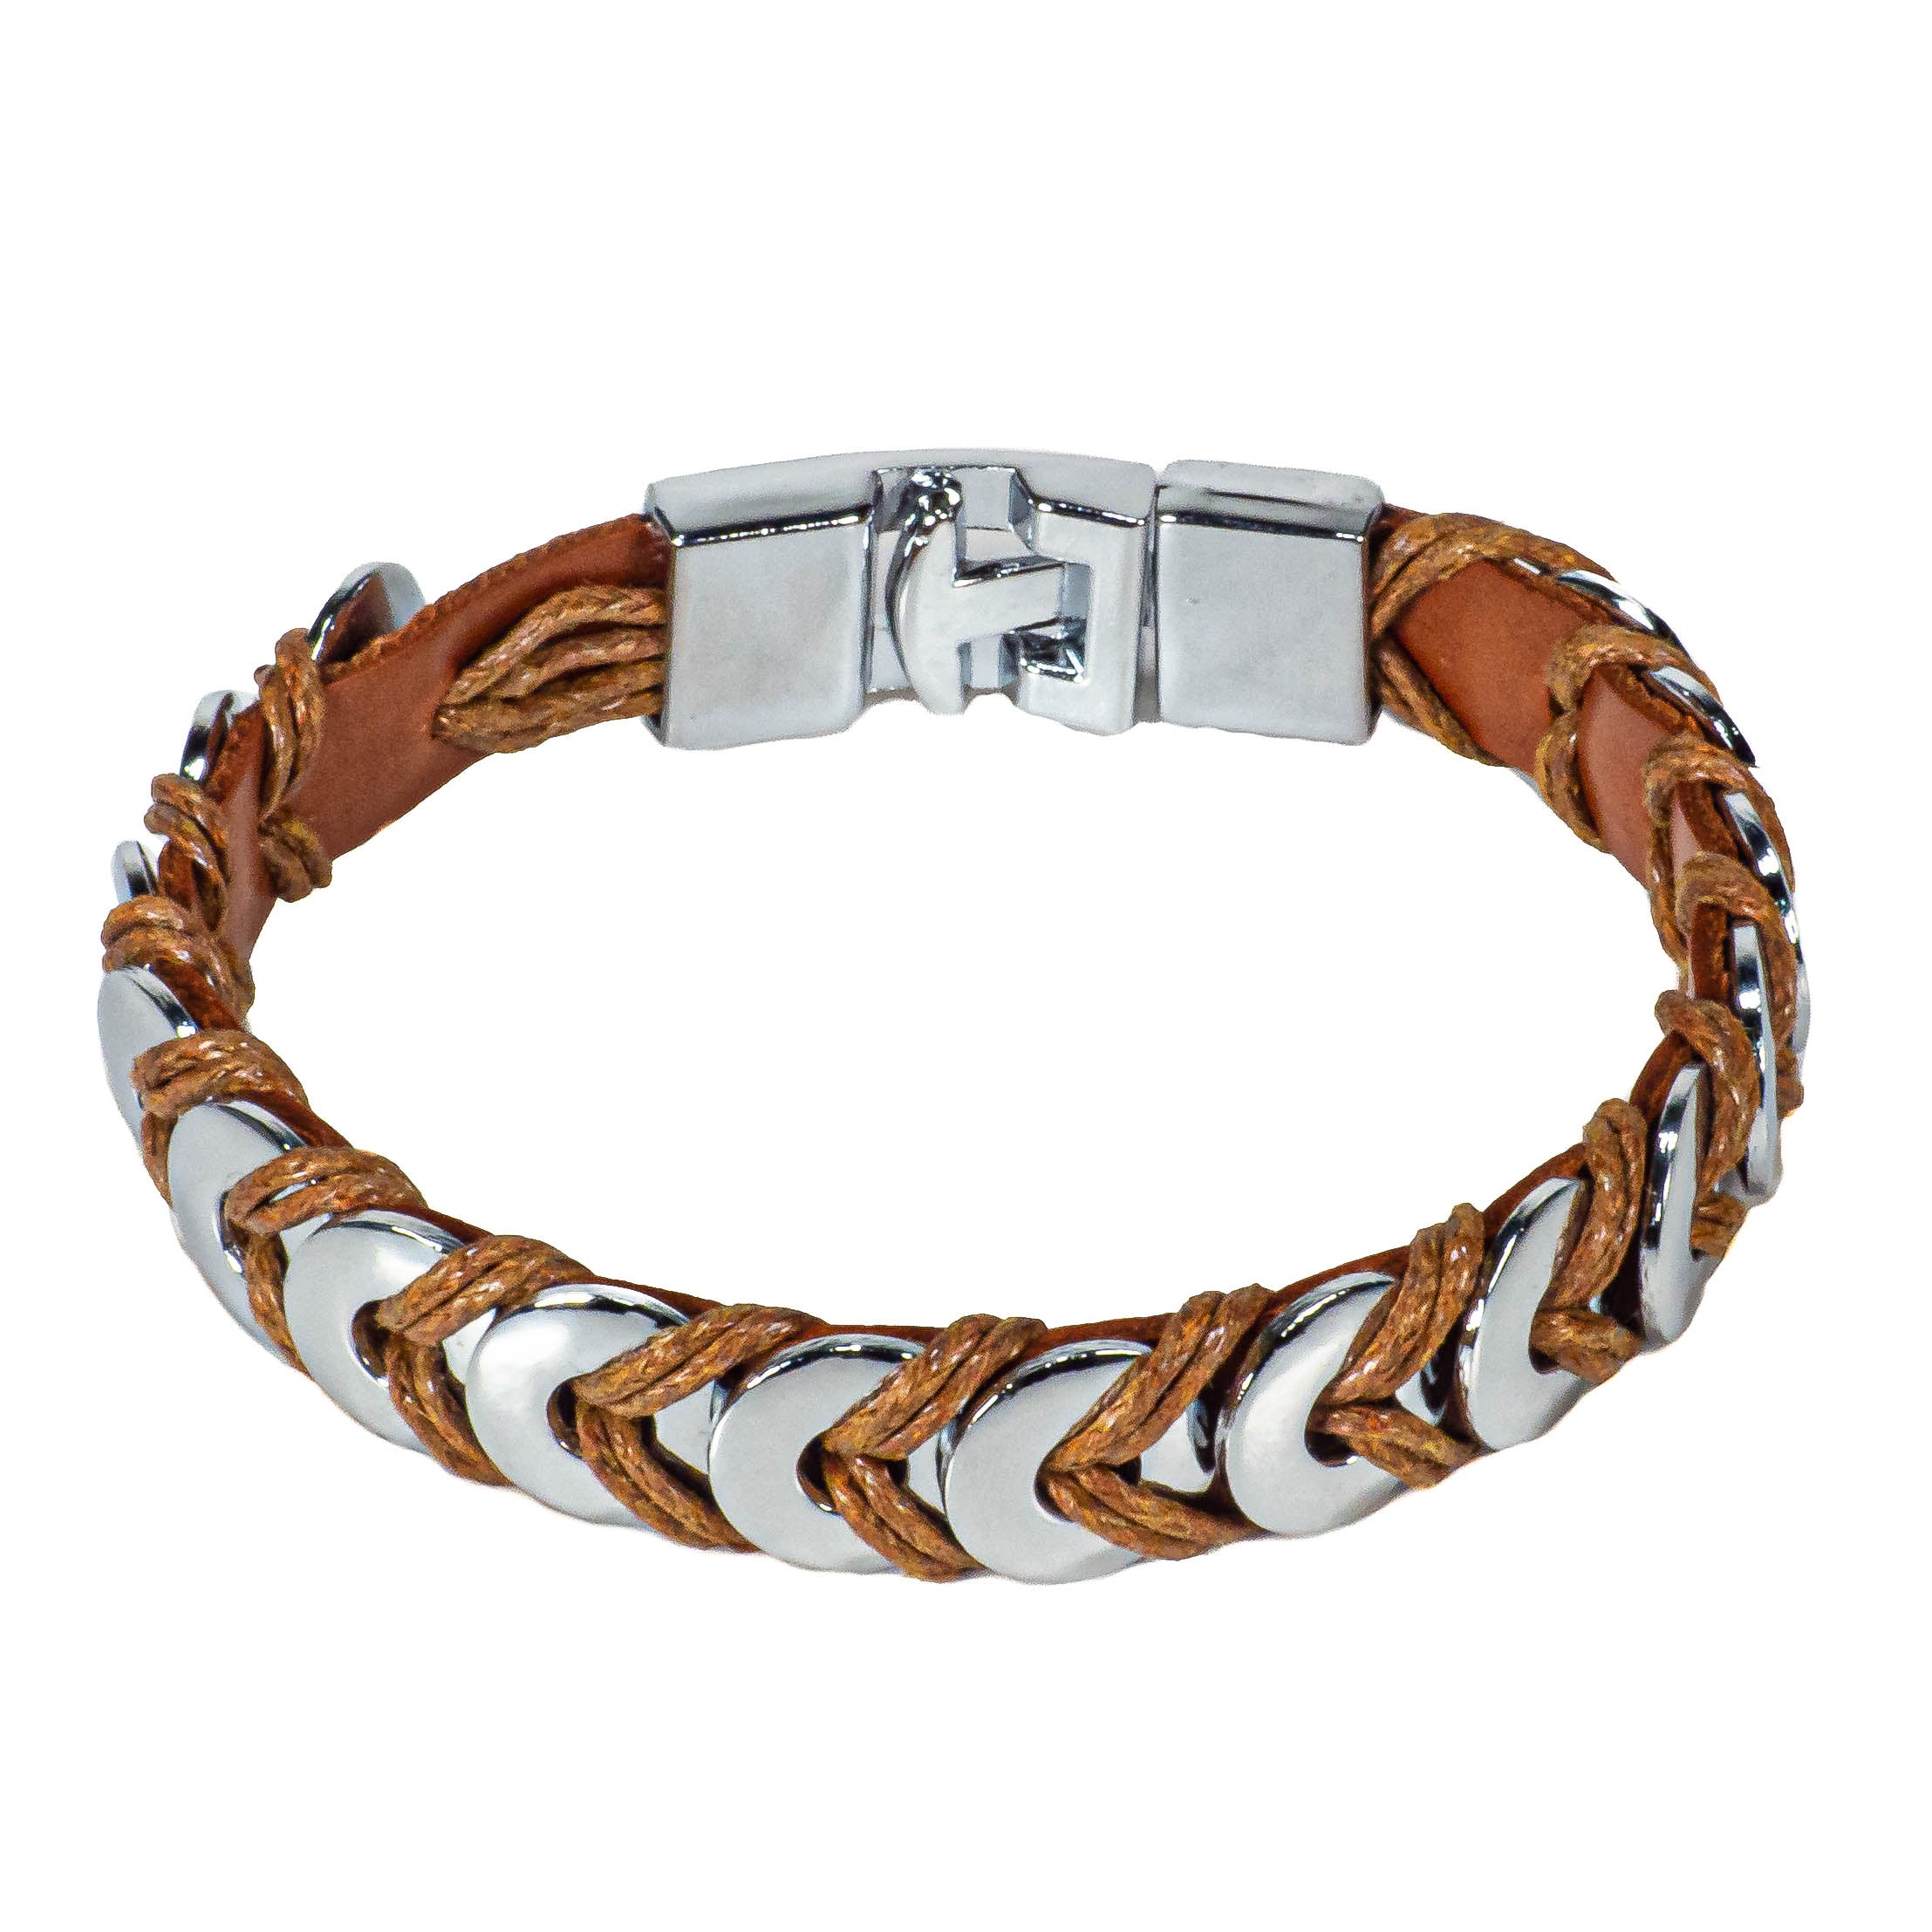 Brown Leather Bracelet with Chrome Discs Design